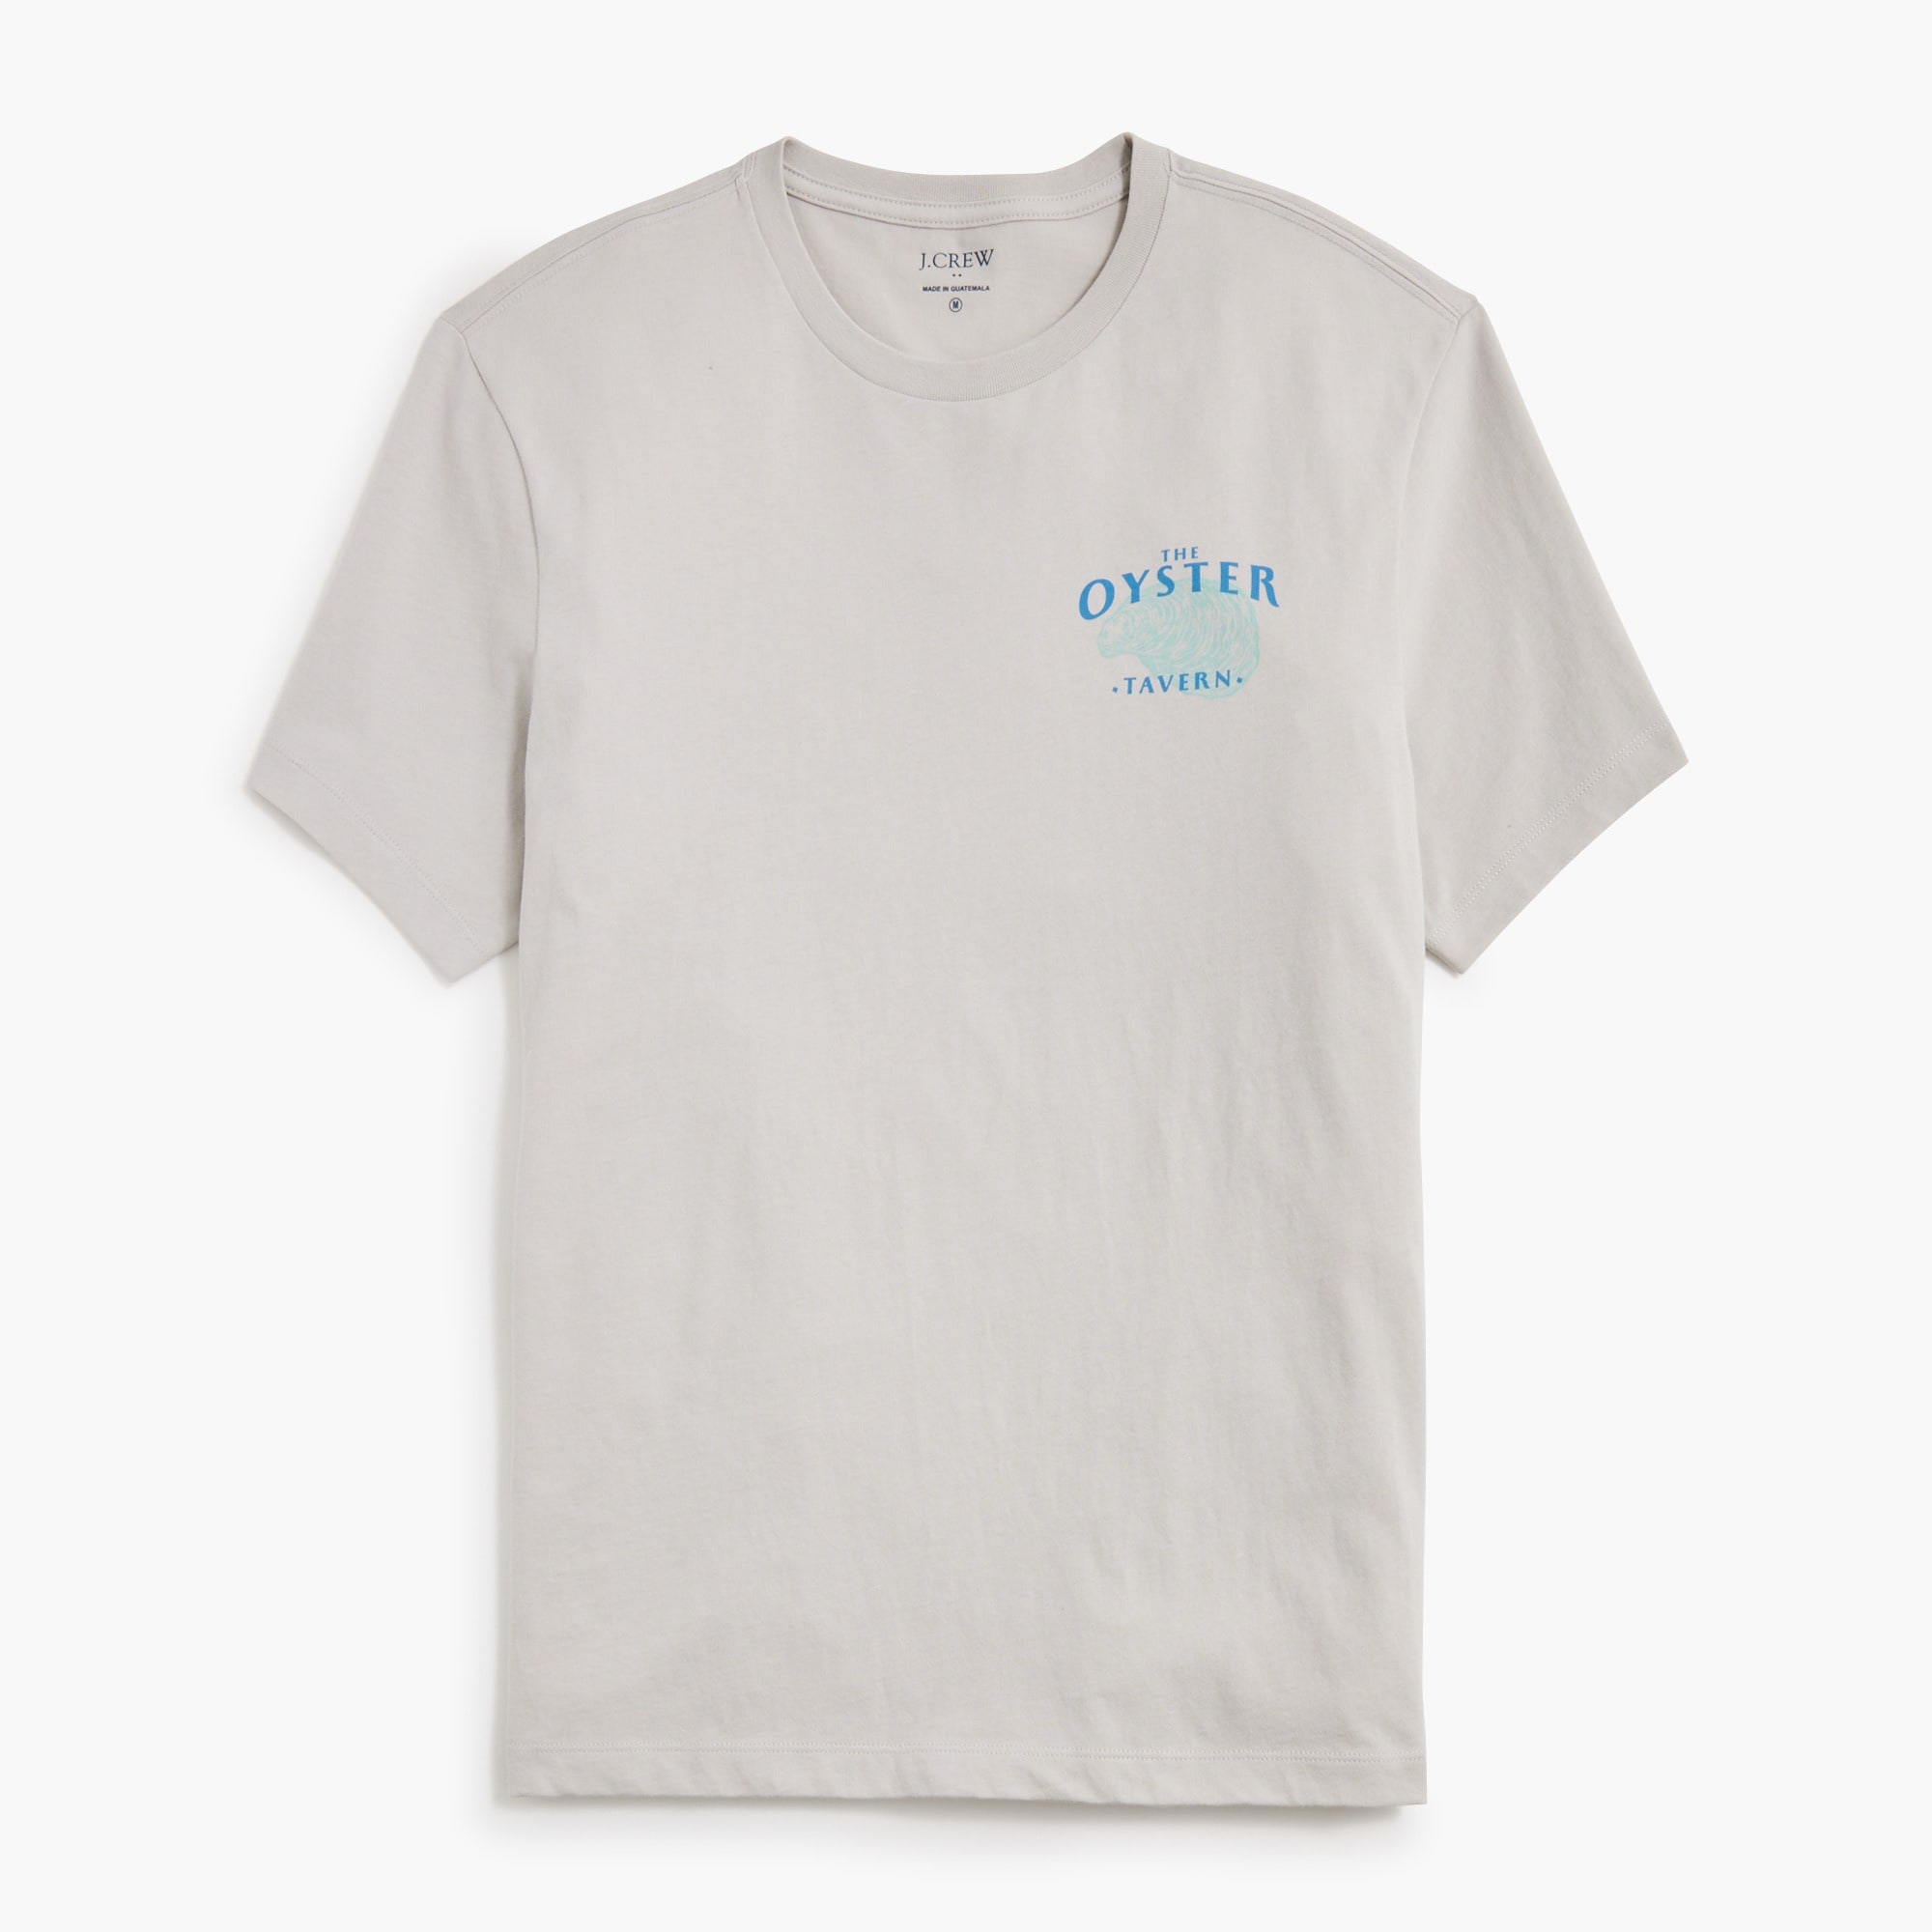  Oyster Tavern graphic tee